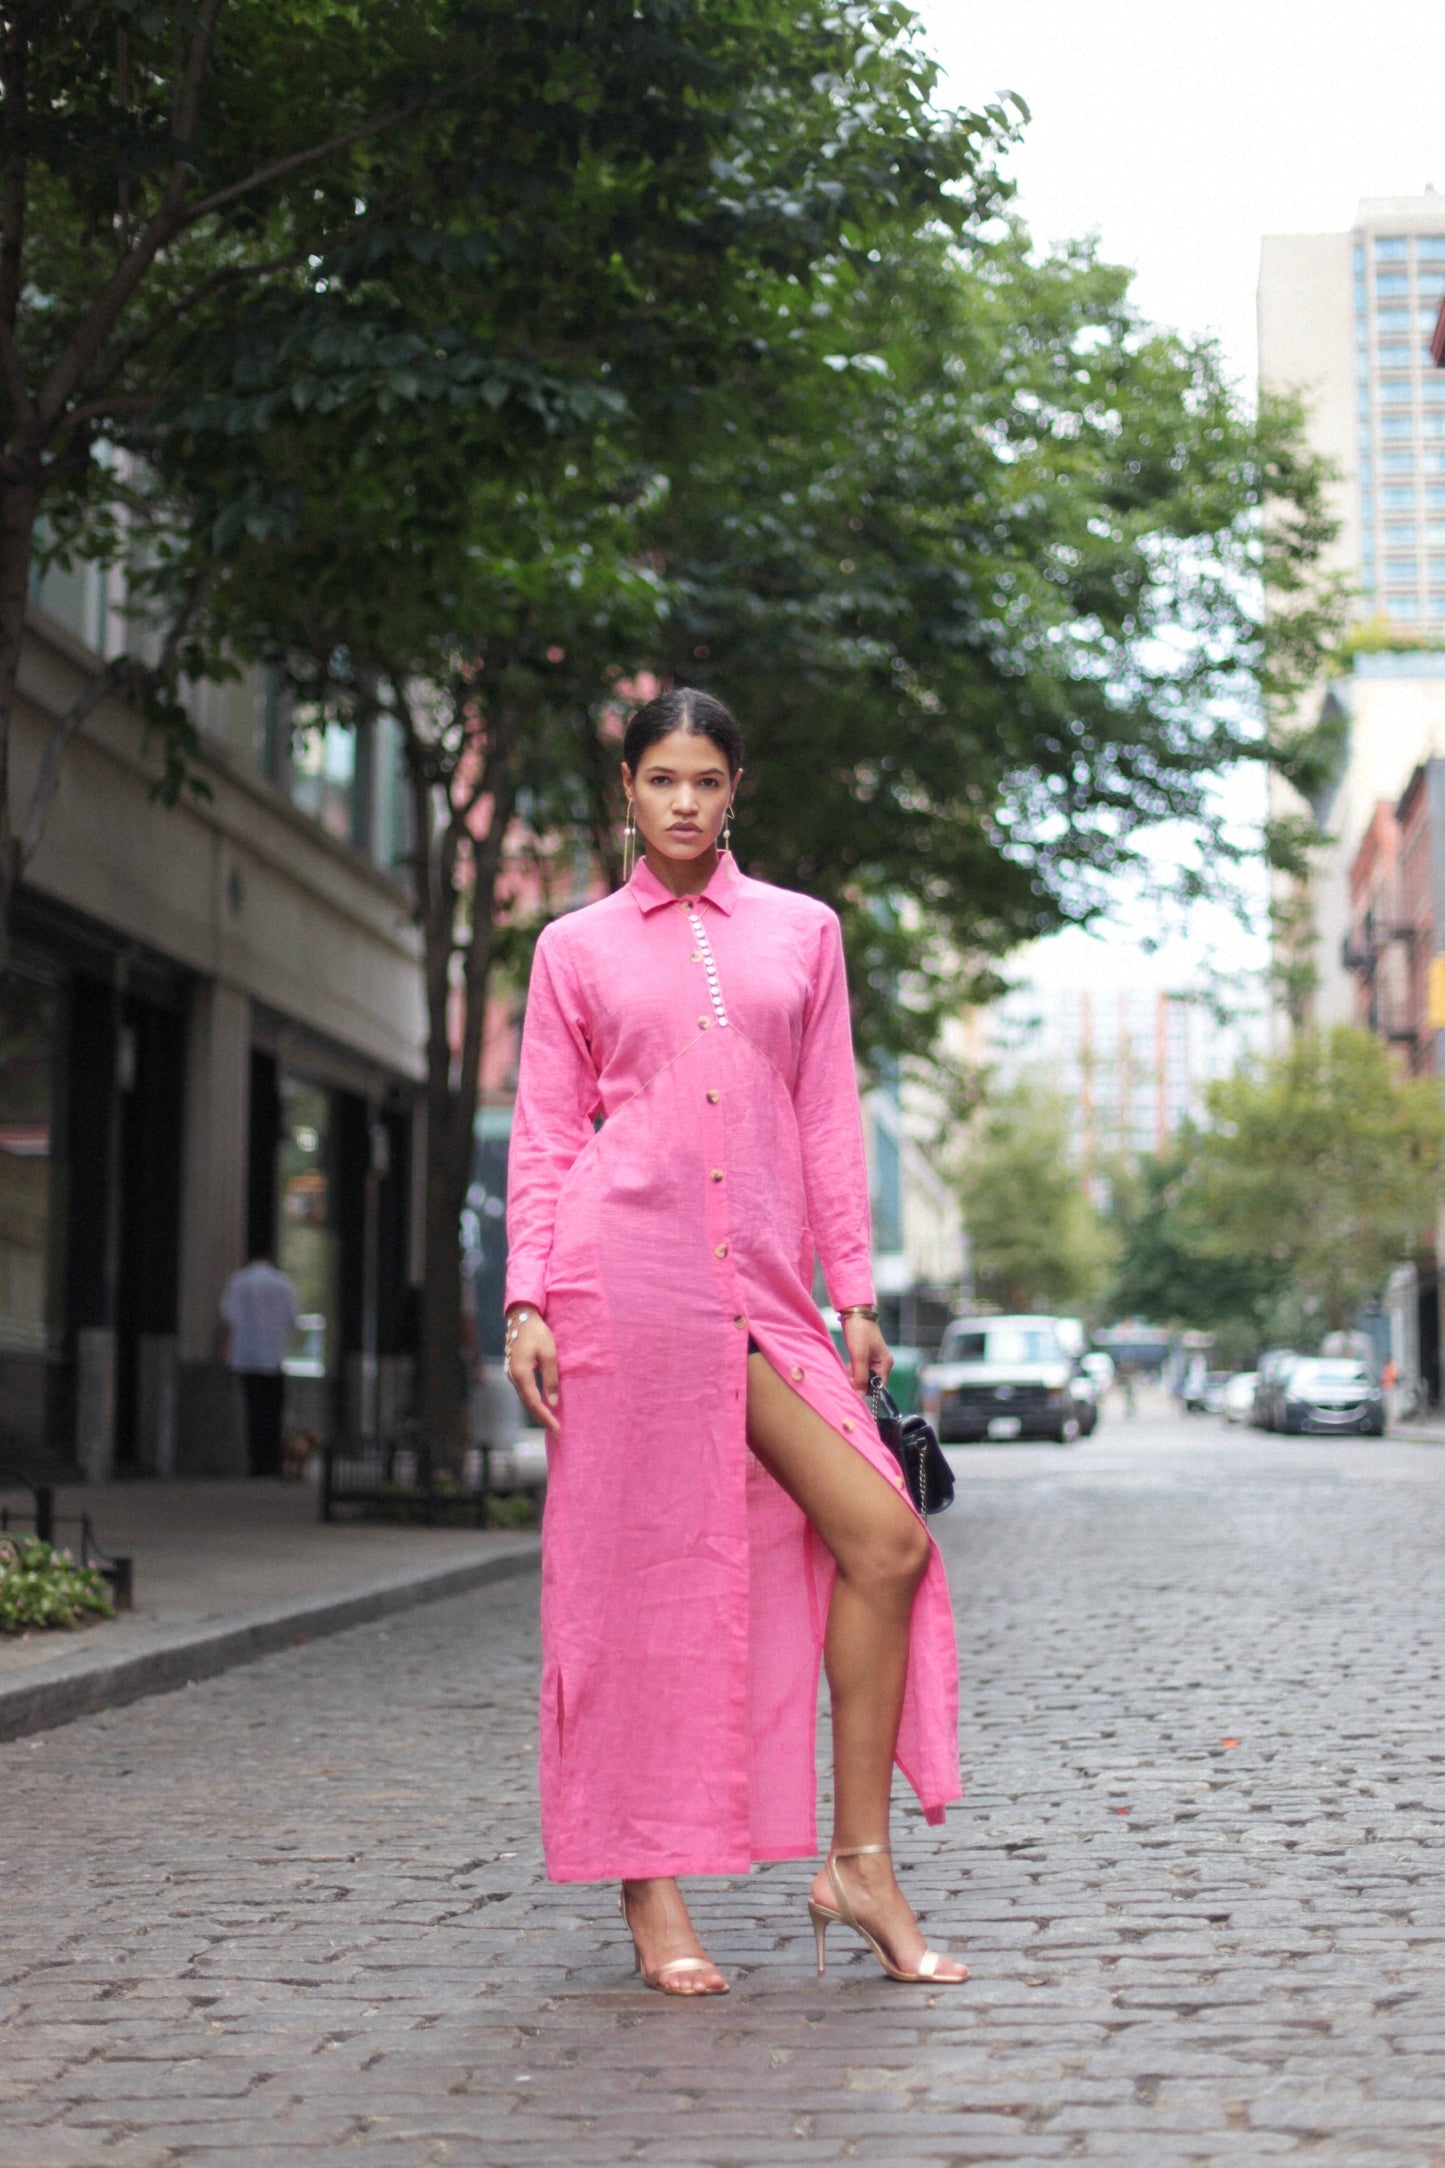 Introducing the Rosa Chic dress in pink—perfect for Black History Month and Valentine's Day. Versatile, graceful, and durable. Fashion meets enduring style.